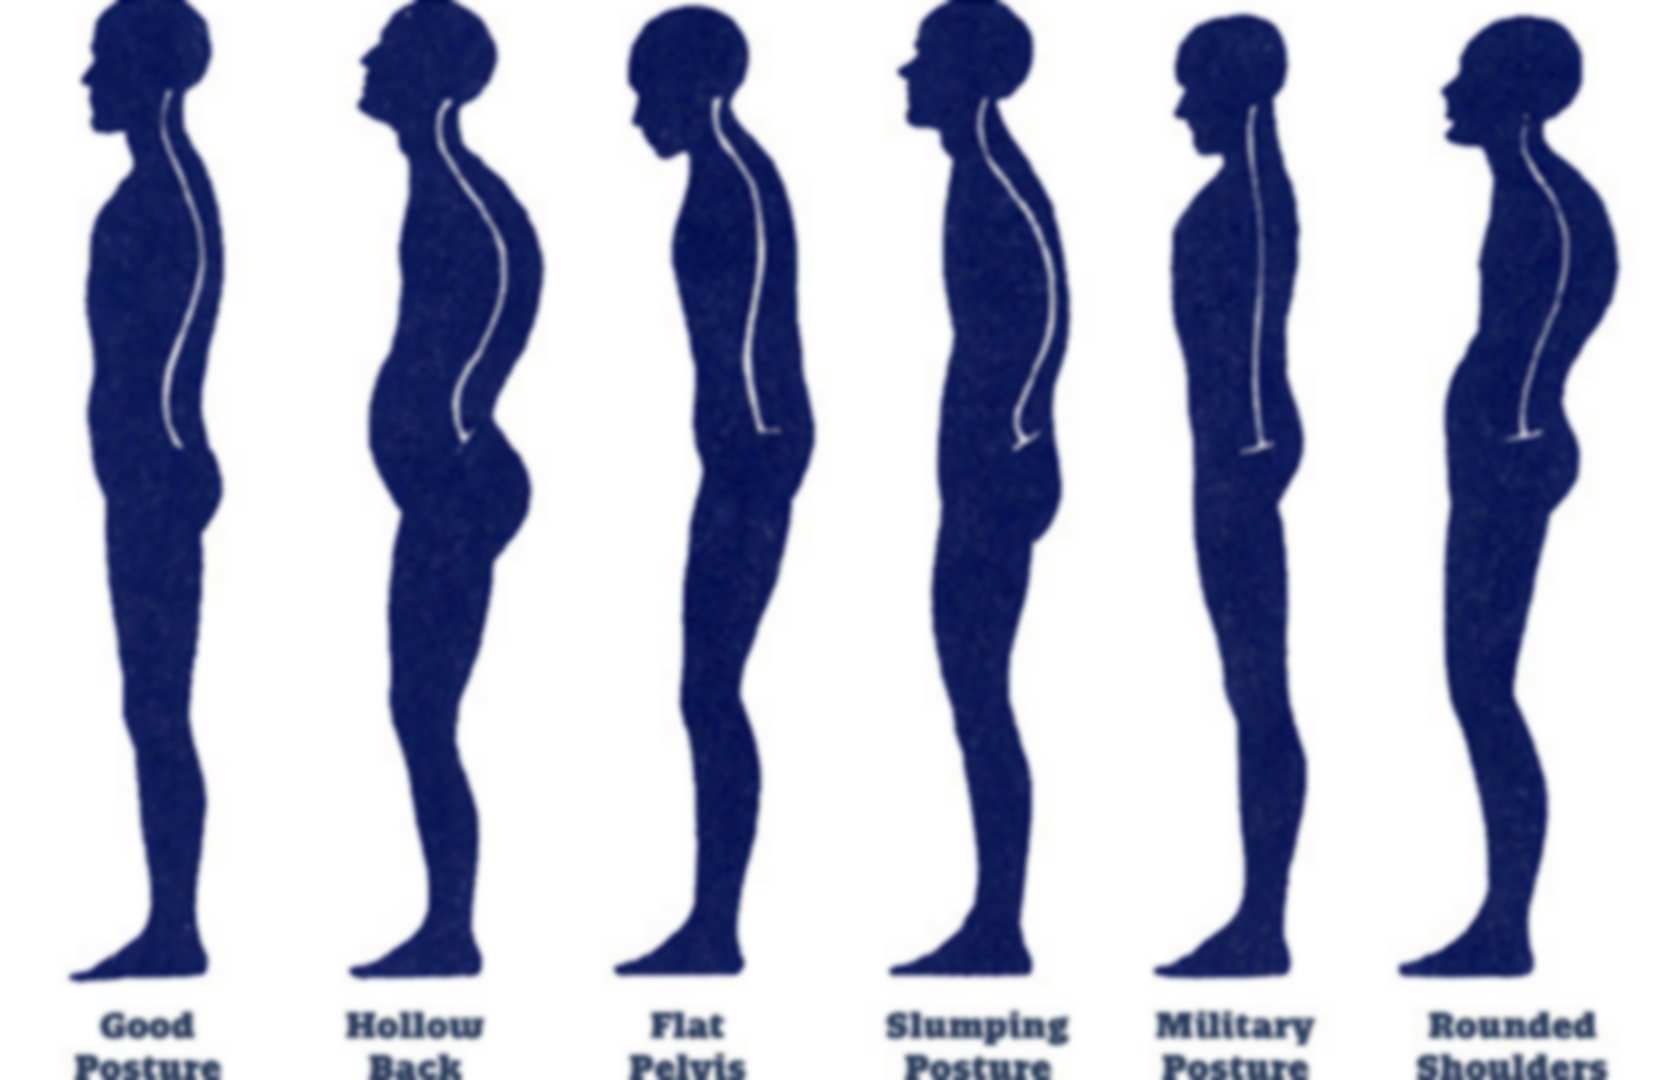 How To Fix Flared Ribs - Posture Direct